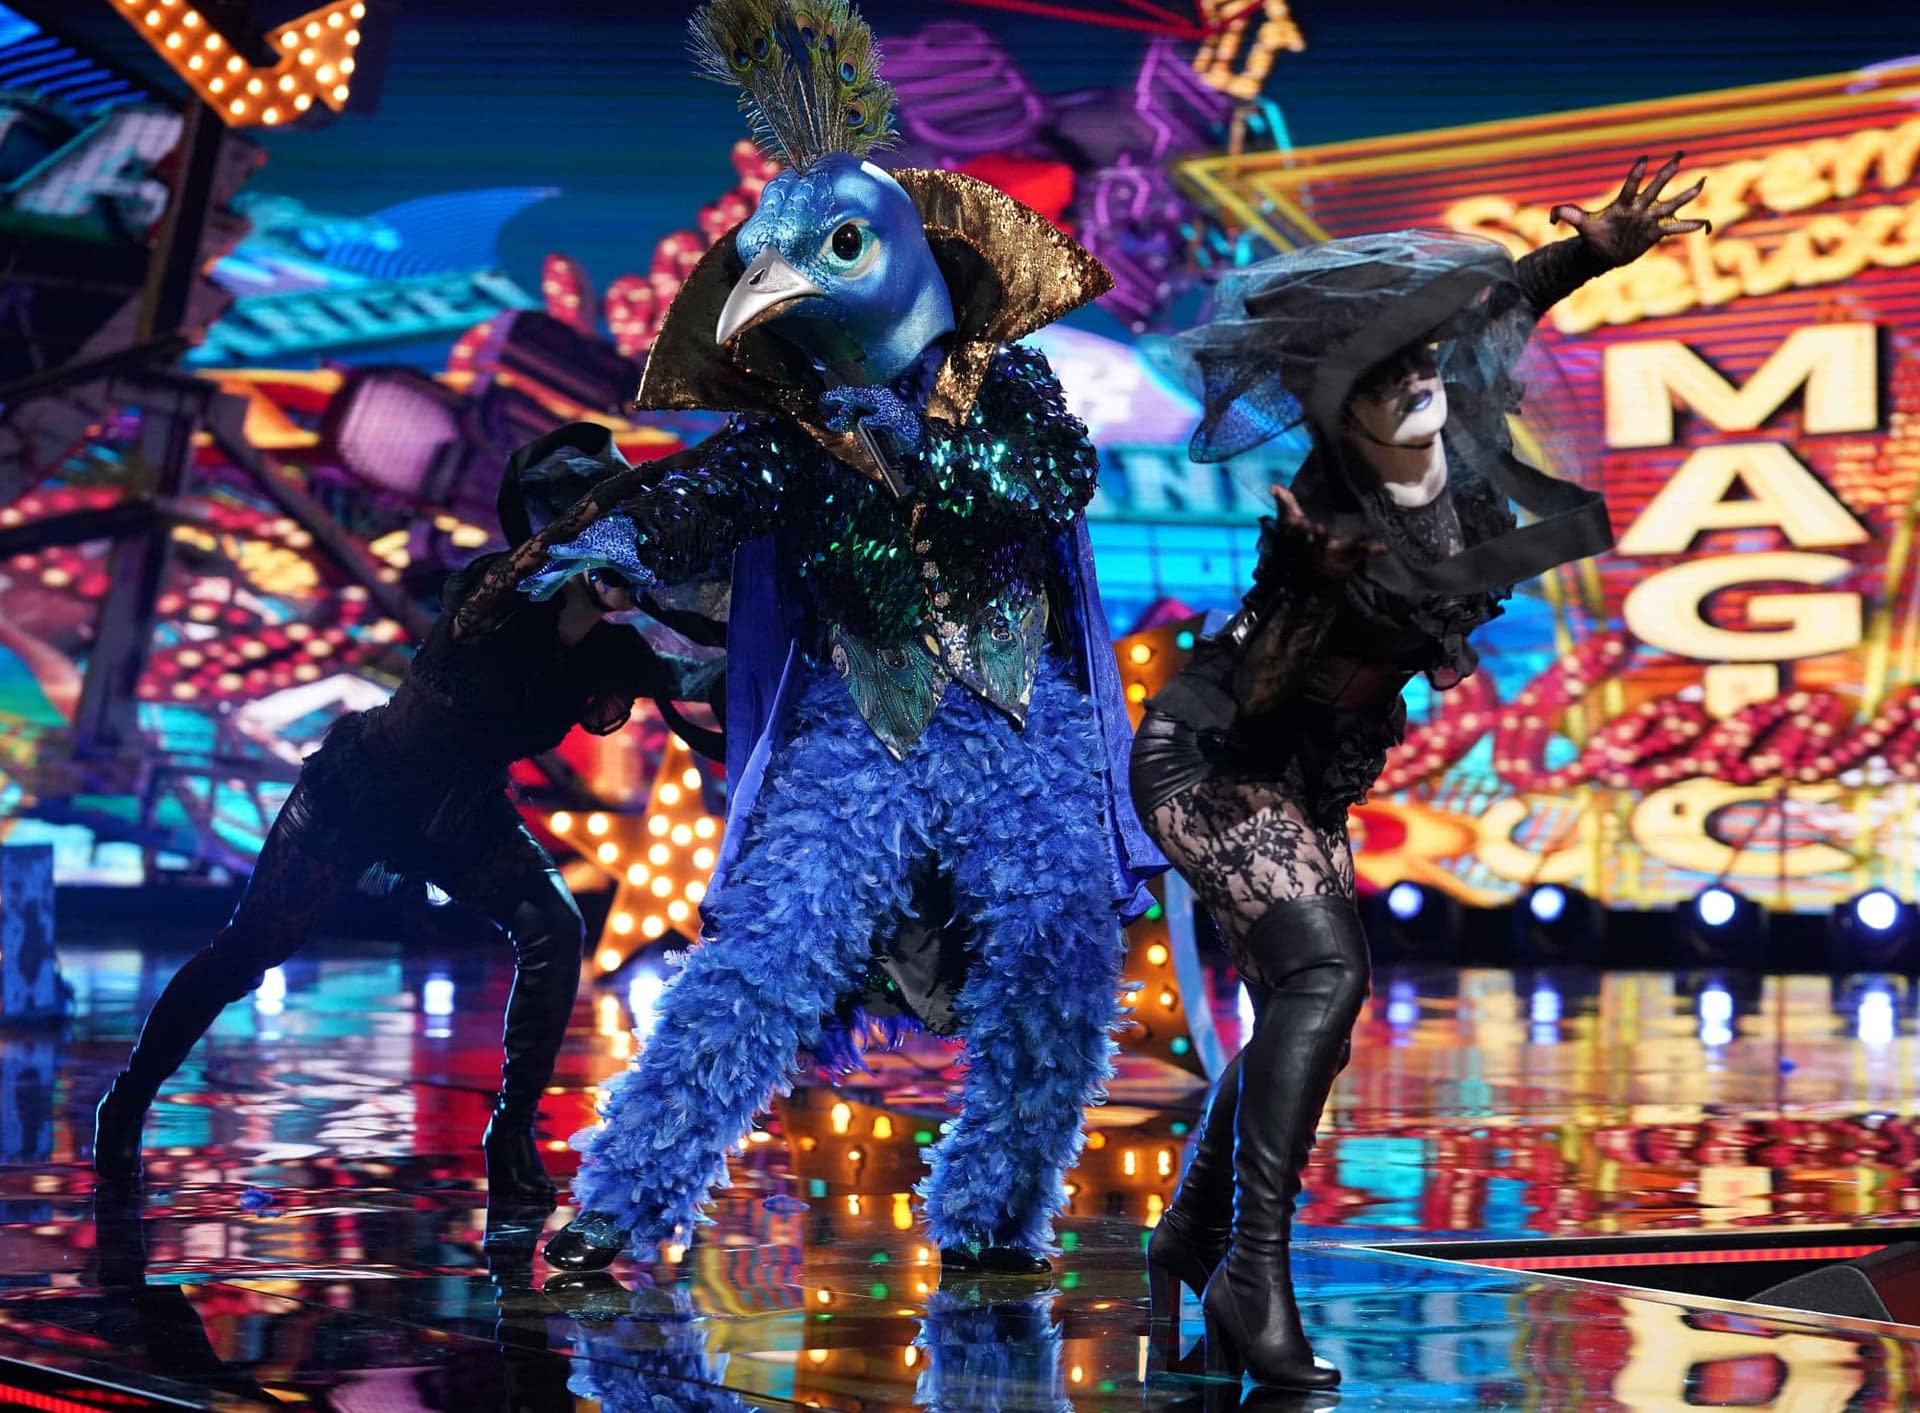 'The Masked Singer' Season 1, Episode 7 "All Together Now" Is One "Smoove" Criminal [REVIEW]